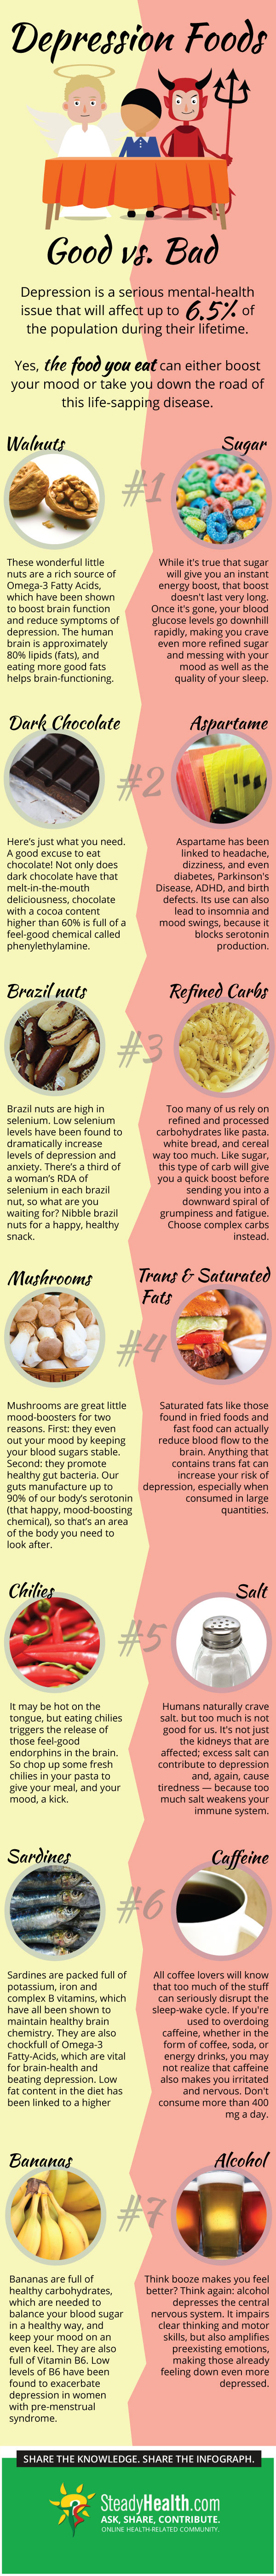 Diet For Depression: The Best And Worst Foods Infographic